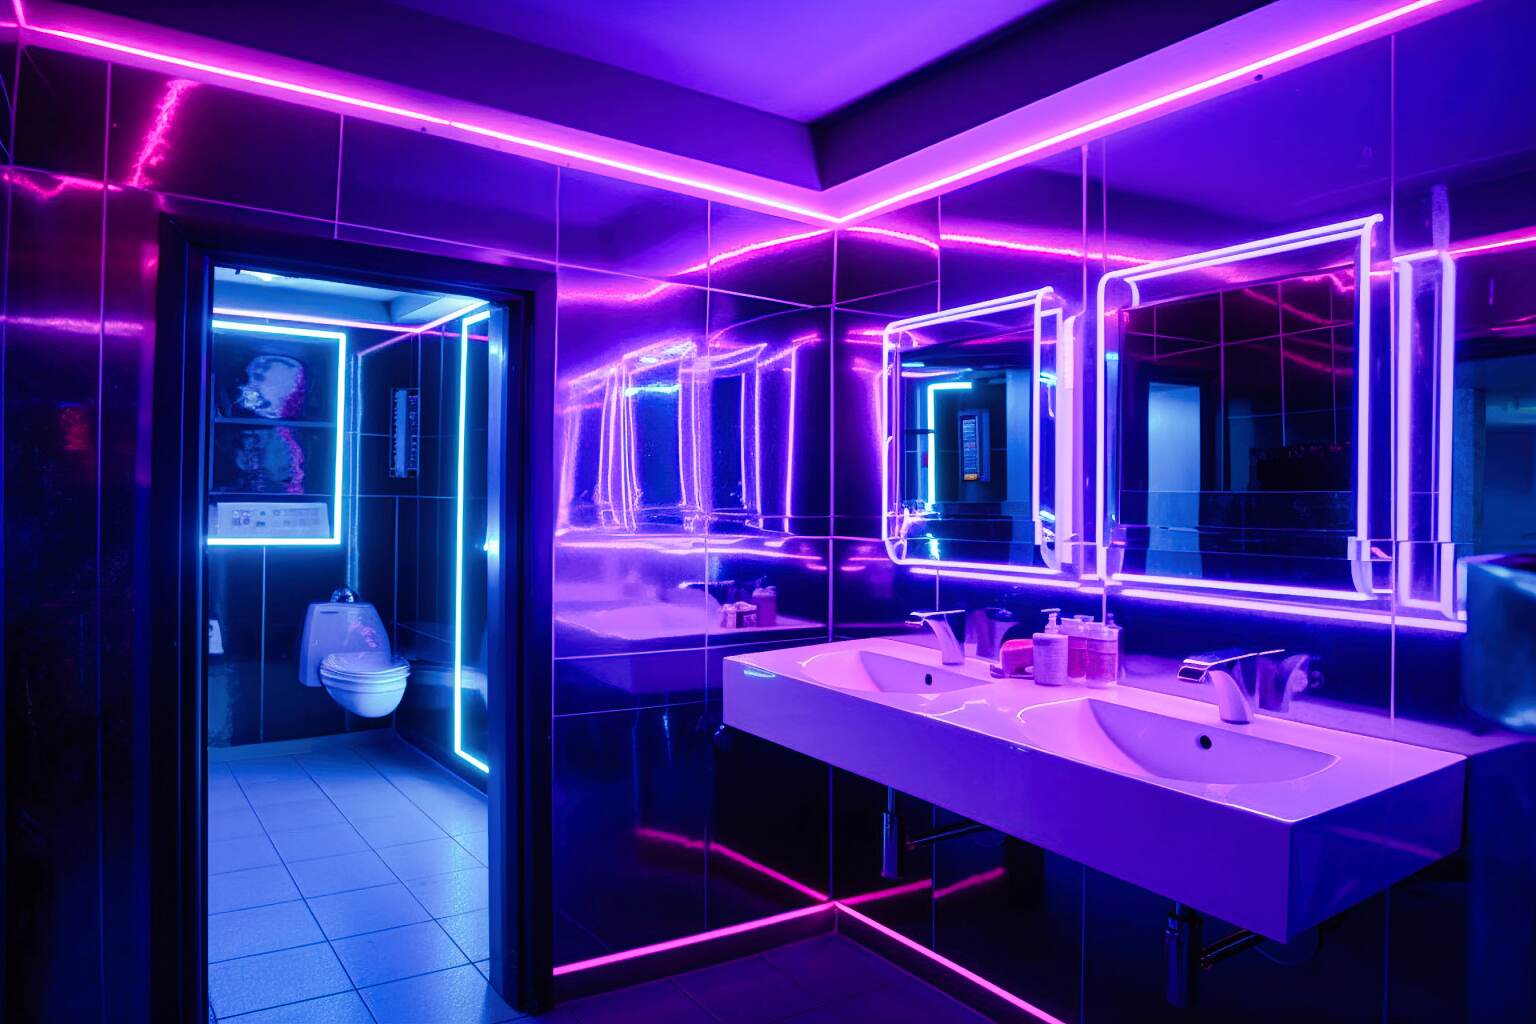 Cyberpunk Inspired Bathroom Drenched In Purple And Blue